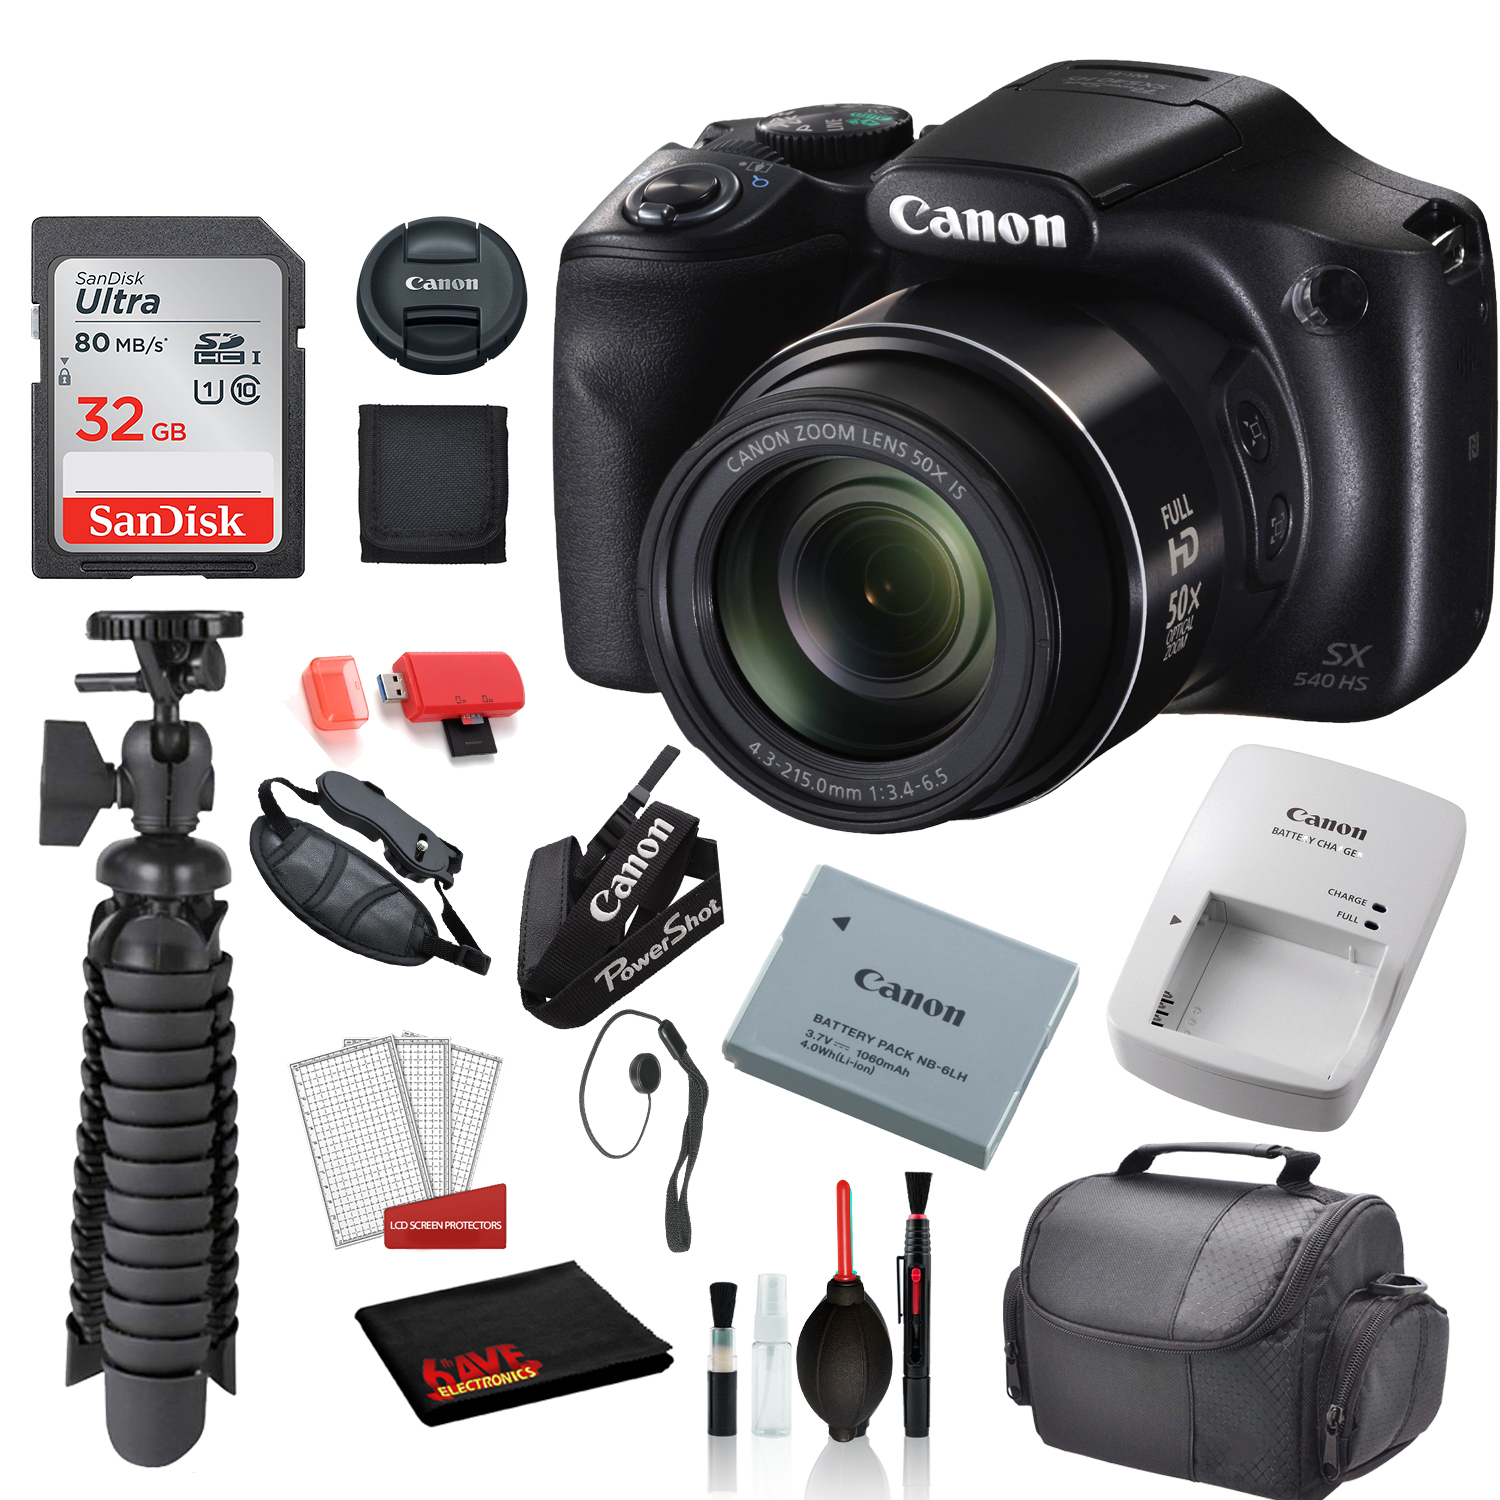 Canon PowerShot SX540 HS Digital Camera (1067C001) with Accessory Bundle package deal 'SanDisk 32gb SD card + Deluxe Cleaning Kit + 12' Tripod + MORE - image 1 of 5